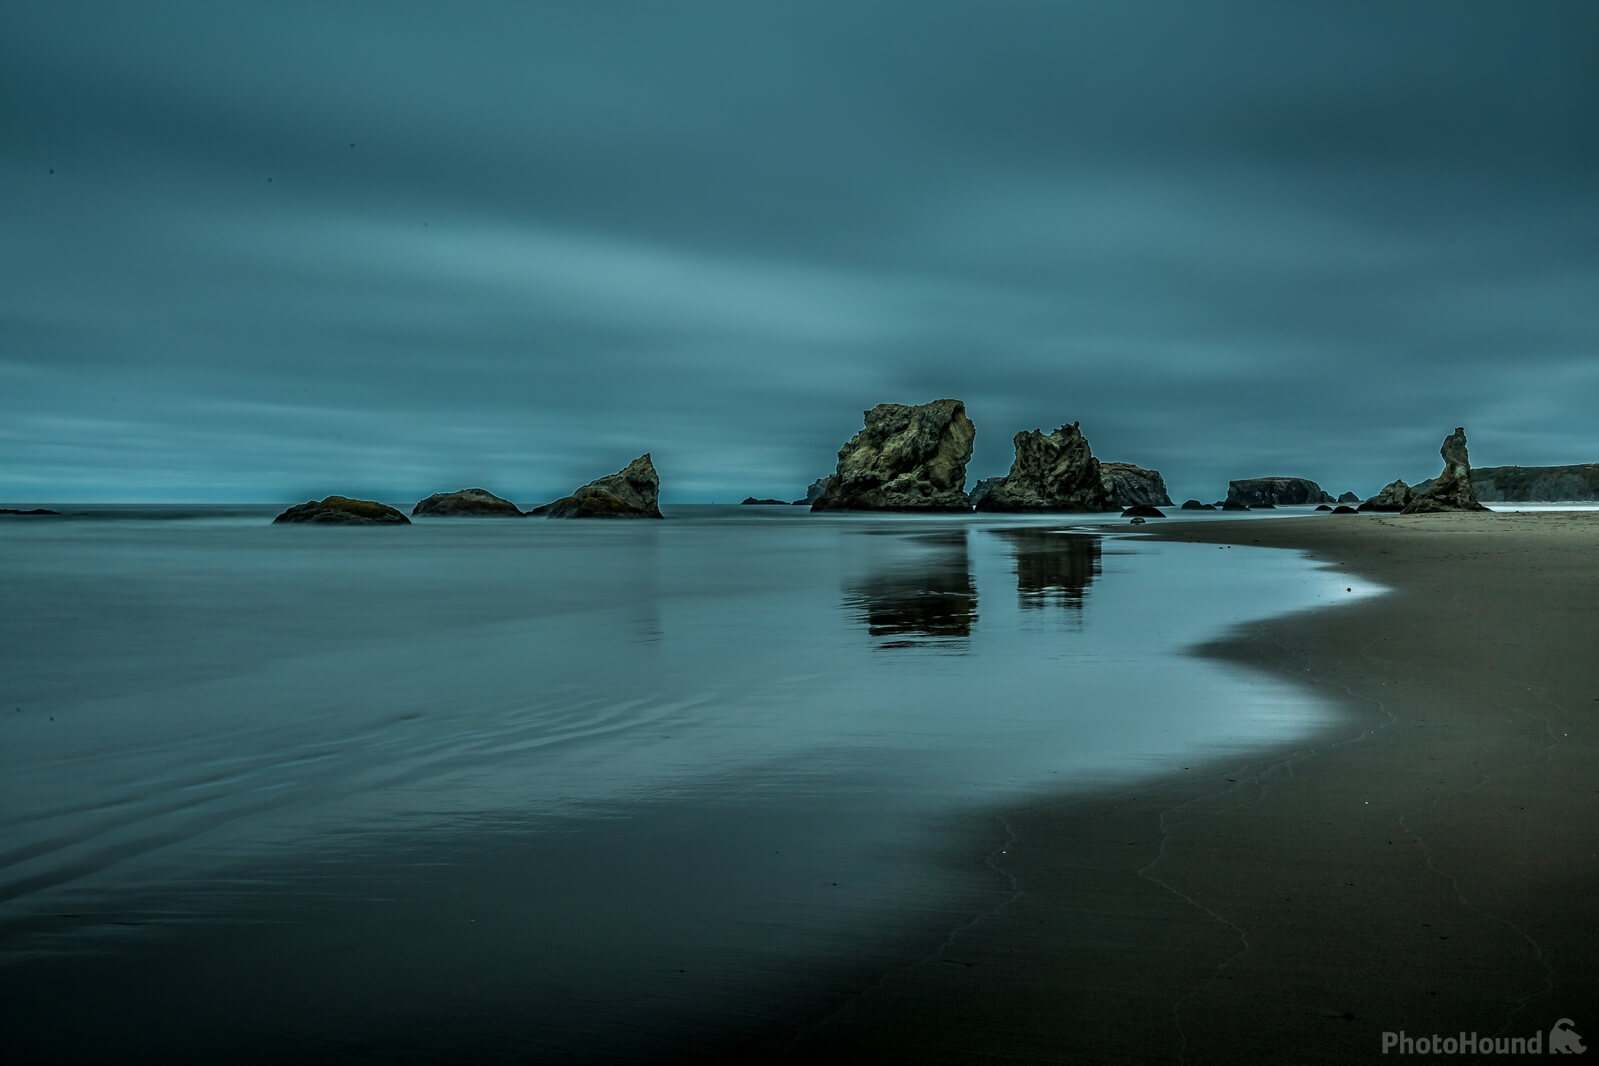 Image of Bandon Beach by Darrell Evans